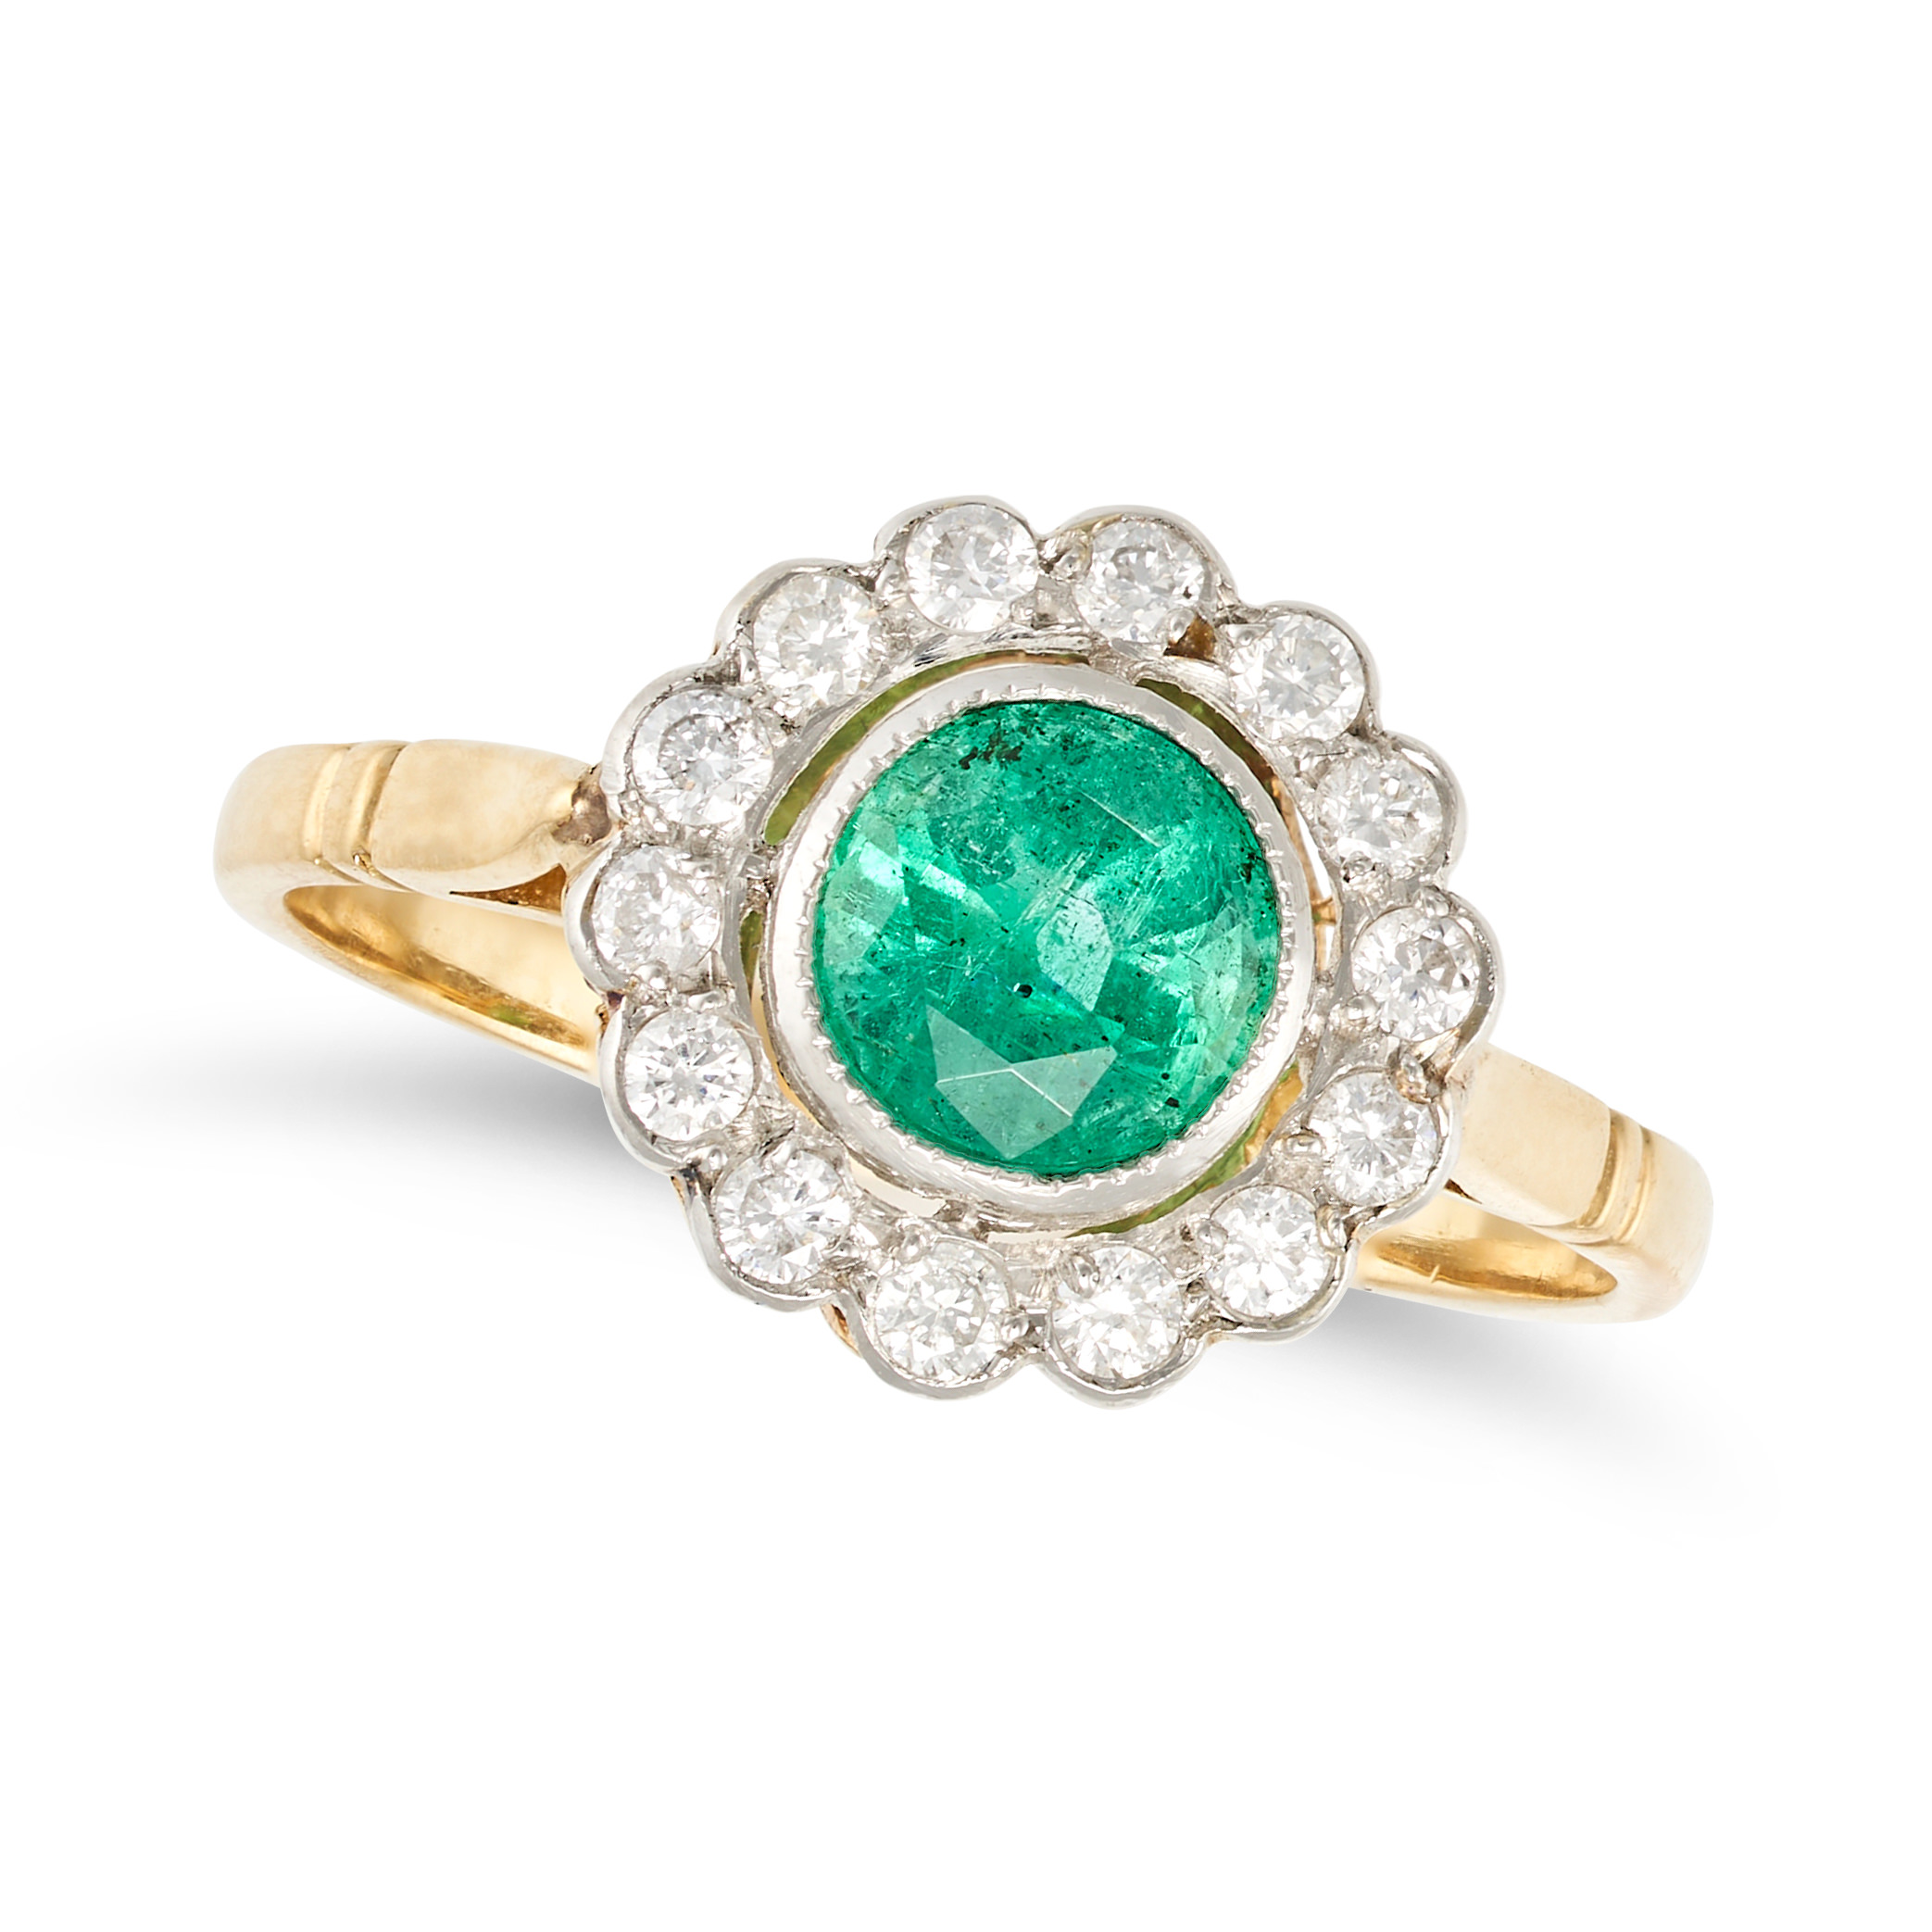 NO RESERVE - AN EMERALD AND DIAMOND CLUSTER RING in 18ct yellow and white gold, set with a round ...